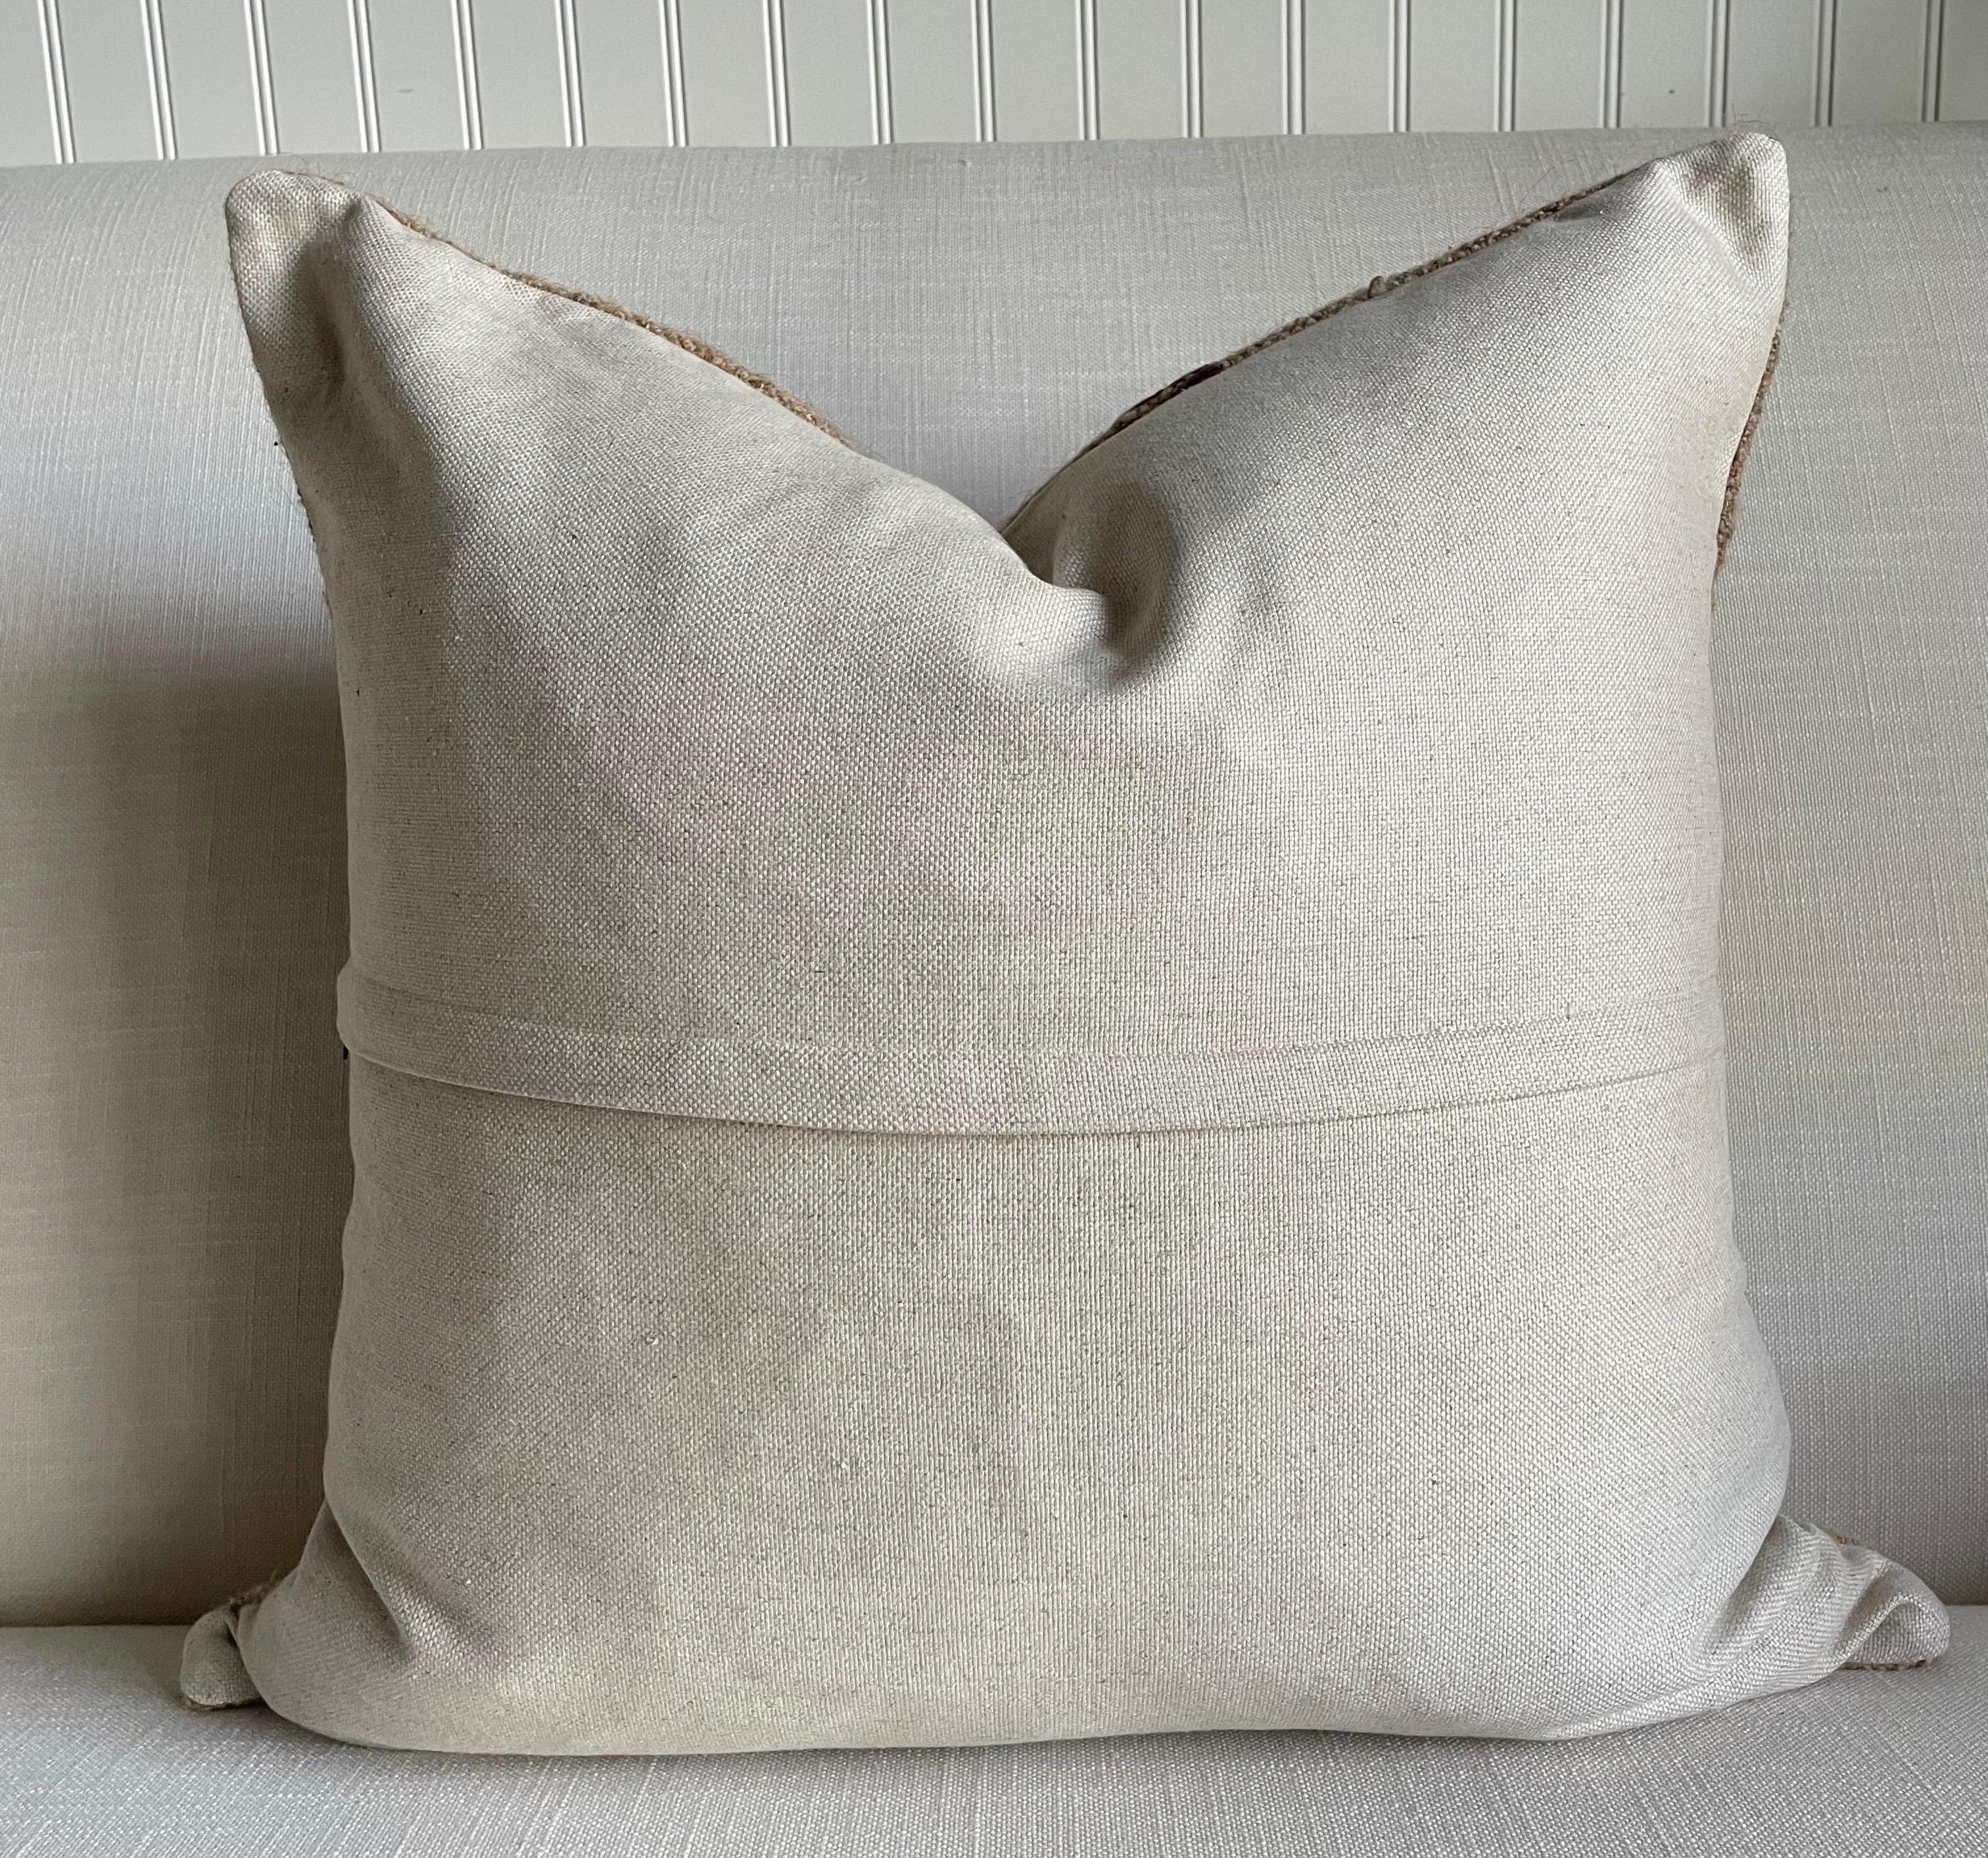 About
Zia Lumbar Pillow
Beautiful neutral warm brown tones, woven with a thick soft nubby texture.
Size: 22